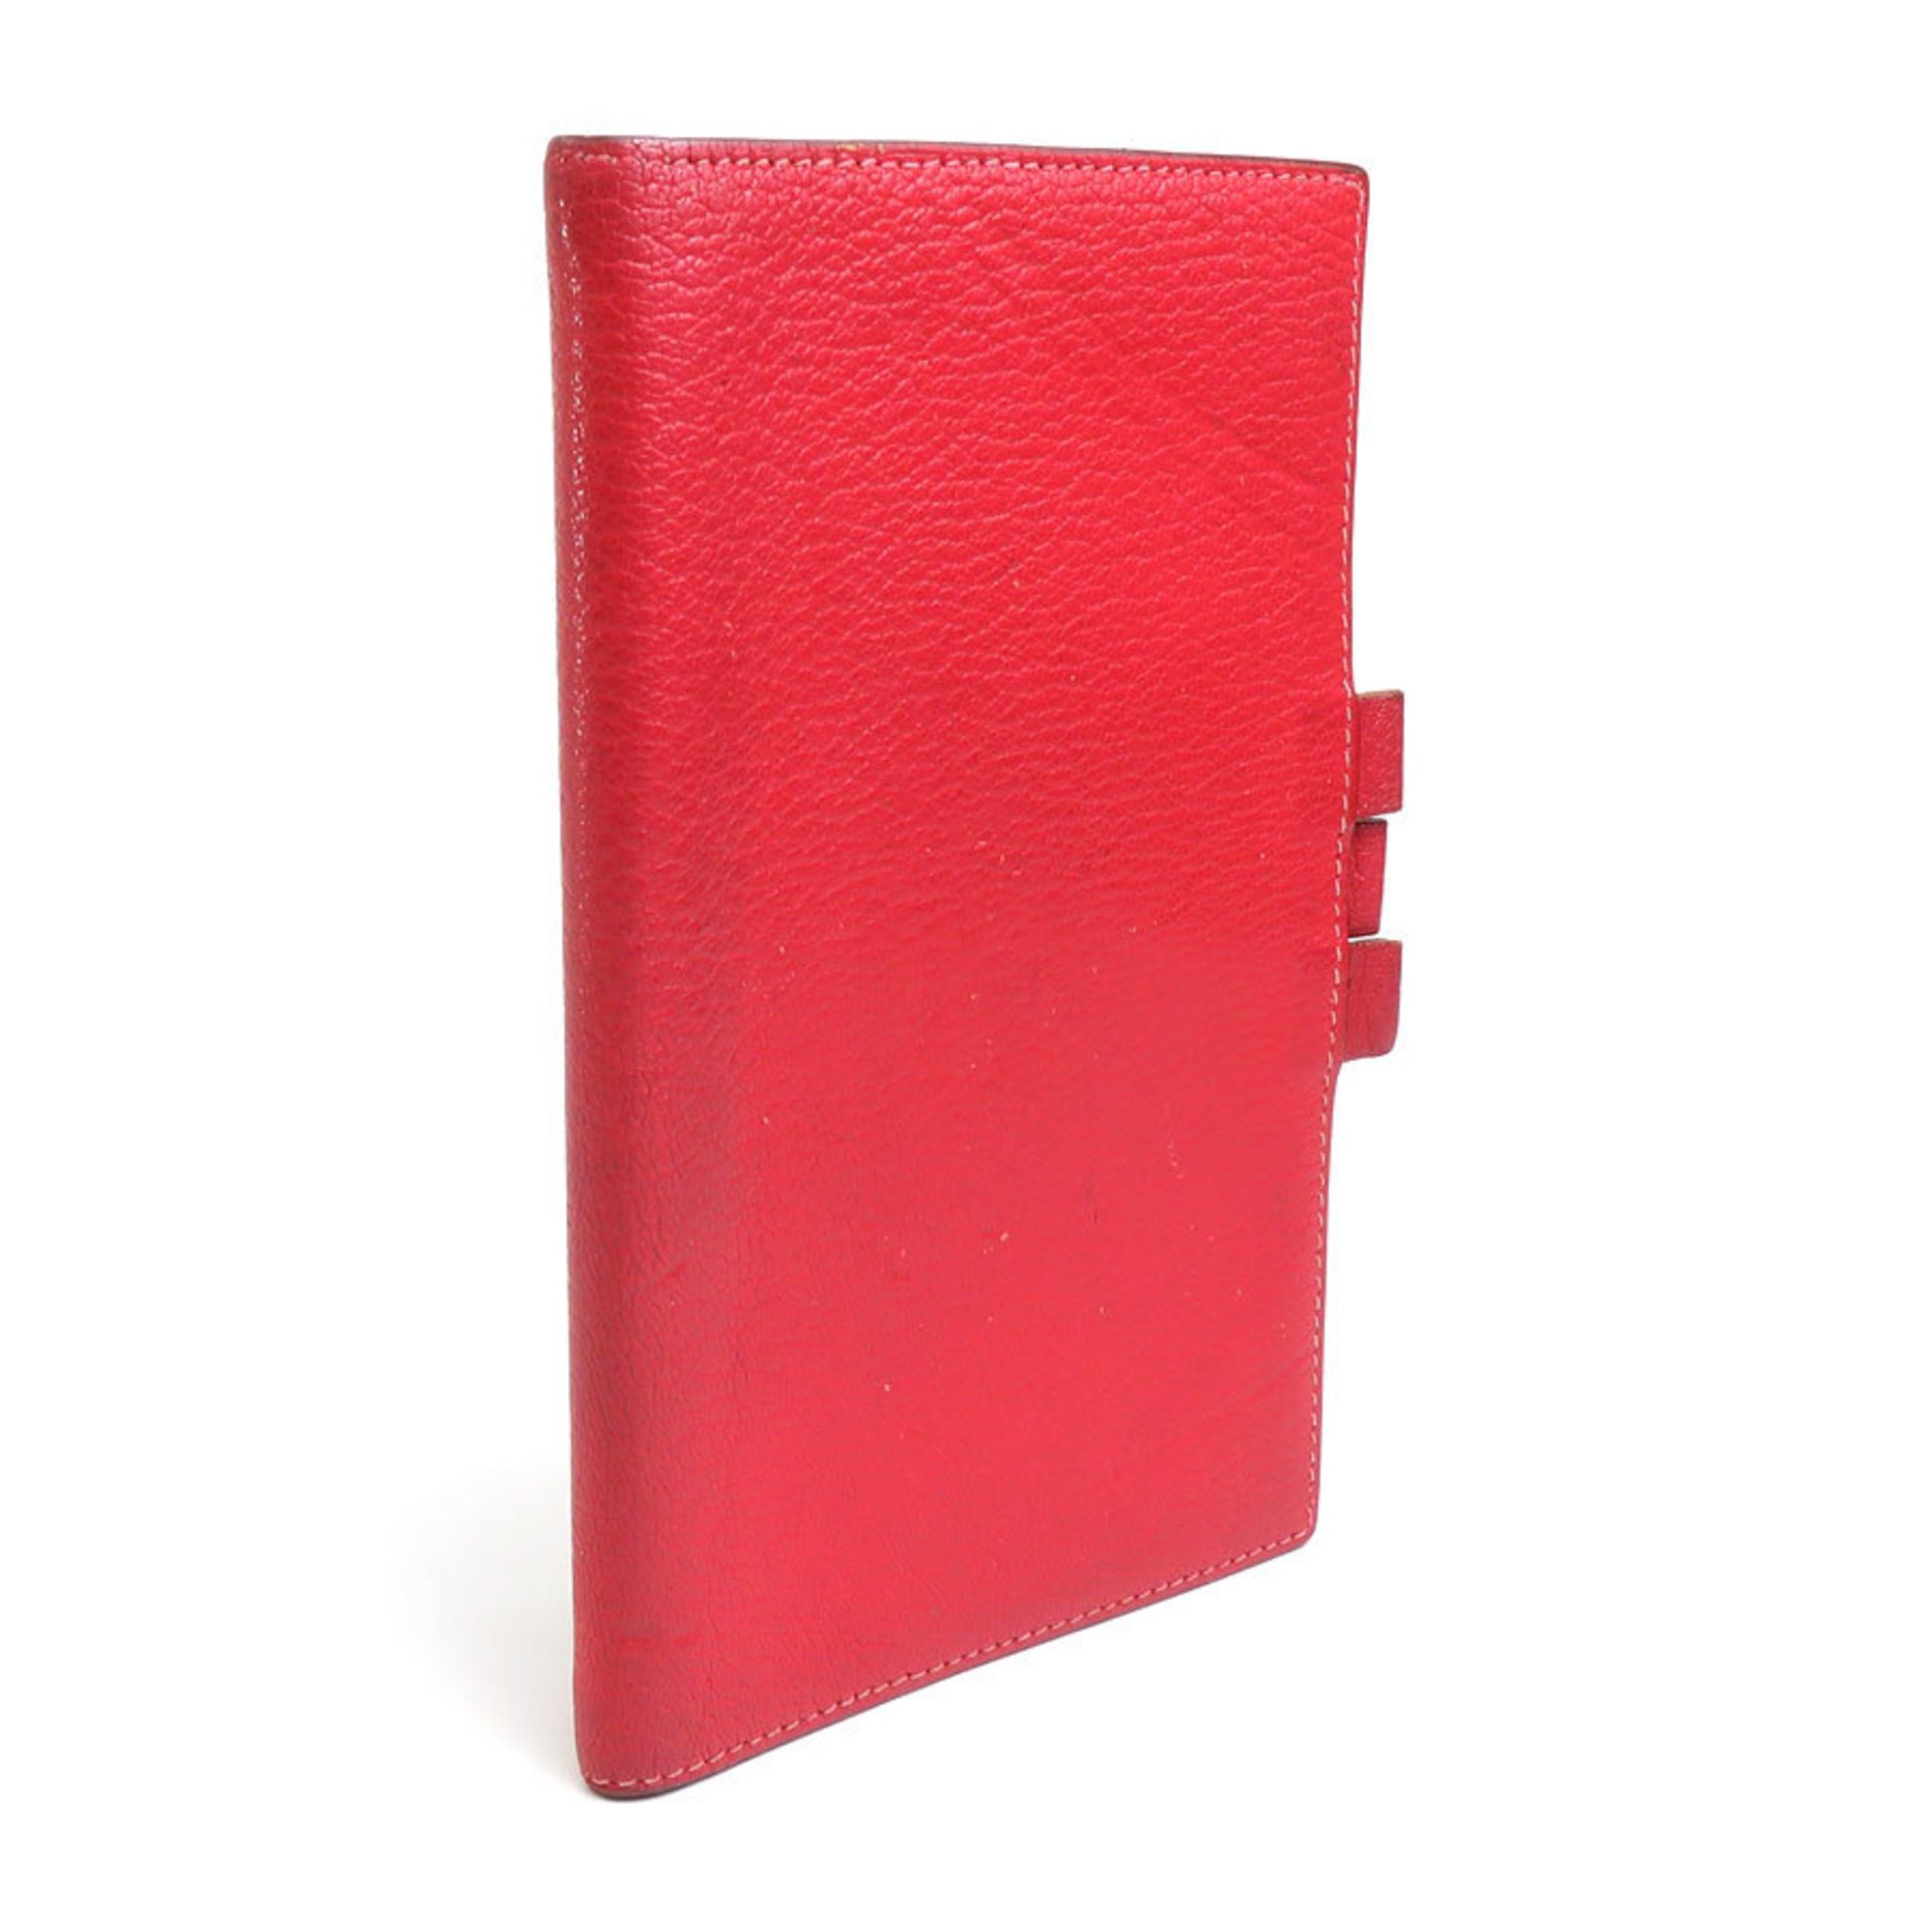 Hermes Notebook Cover Leather Red Unisex